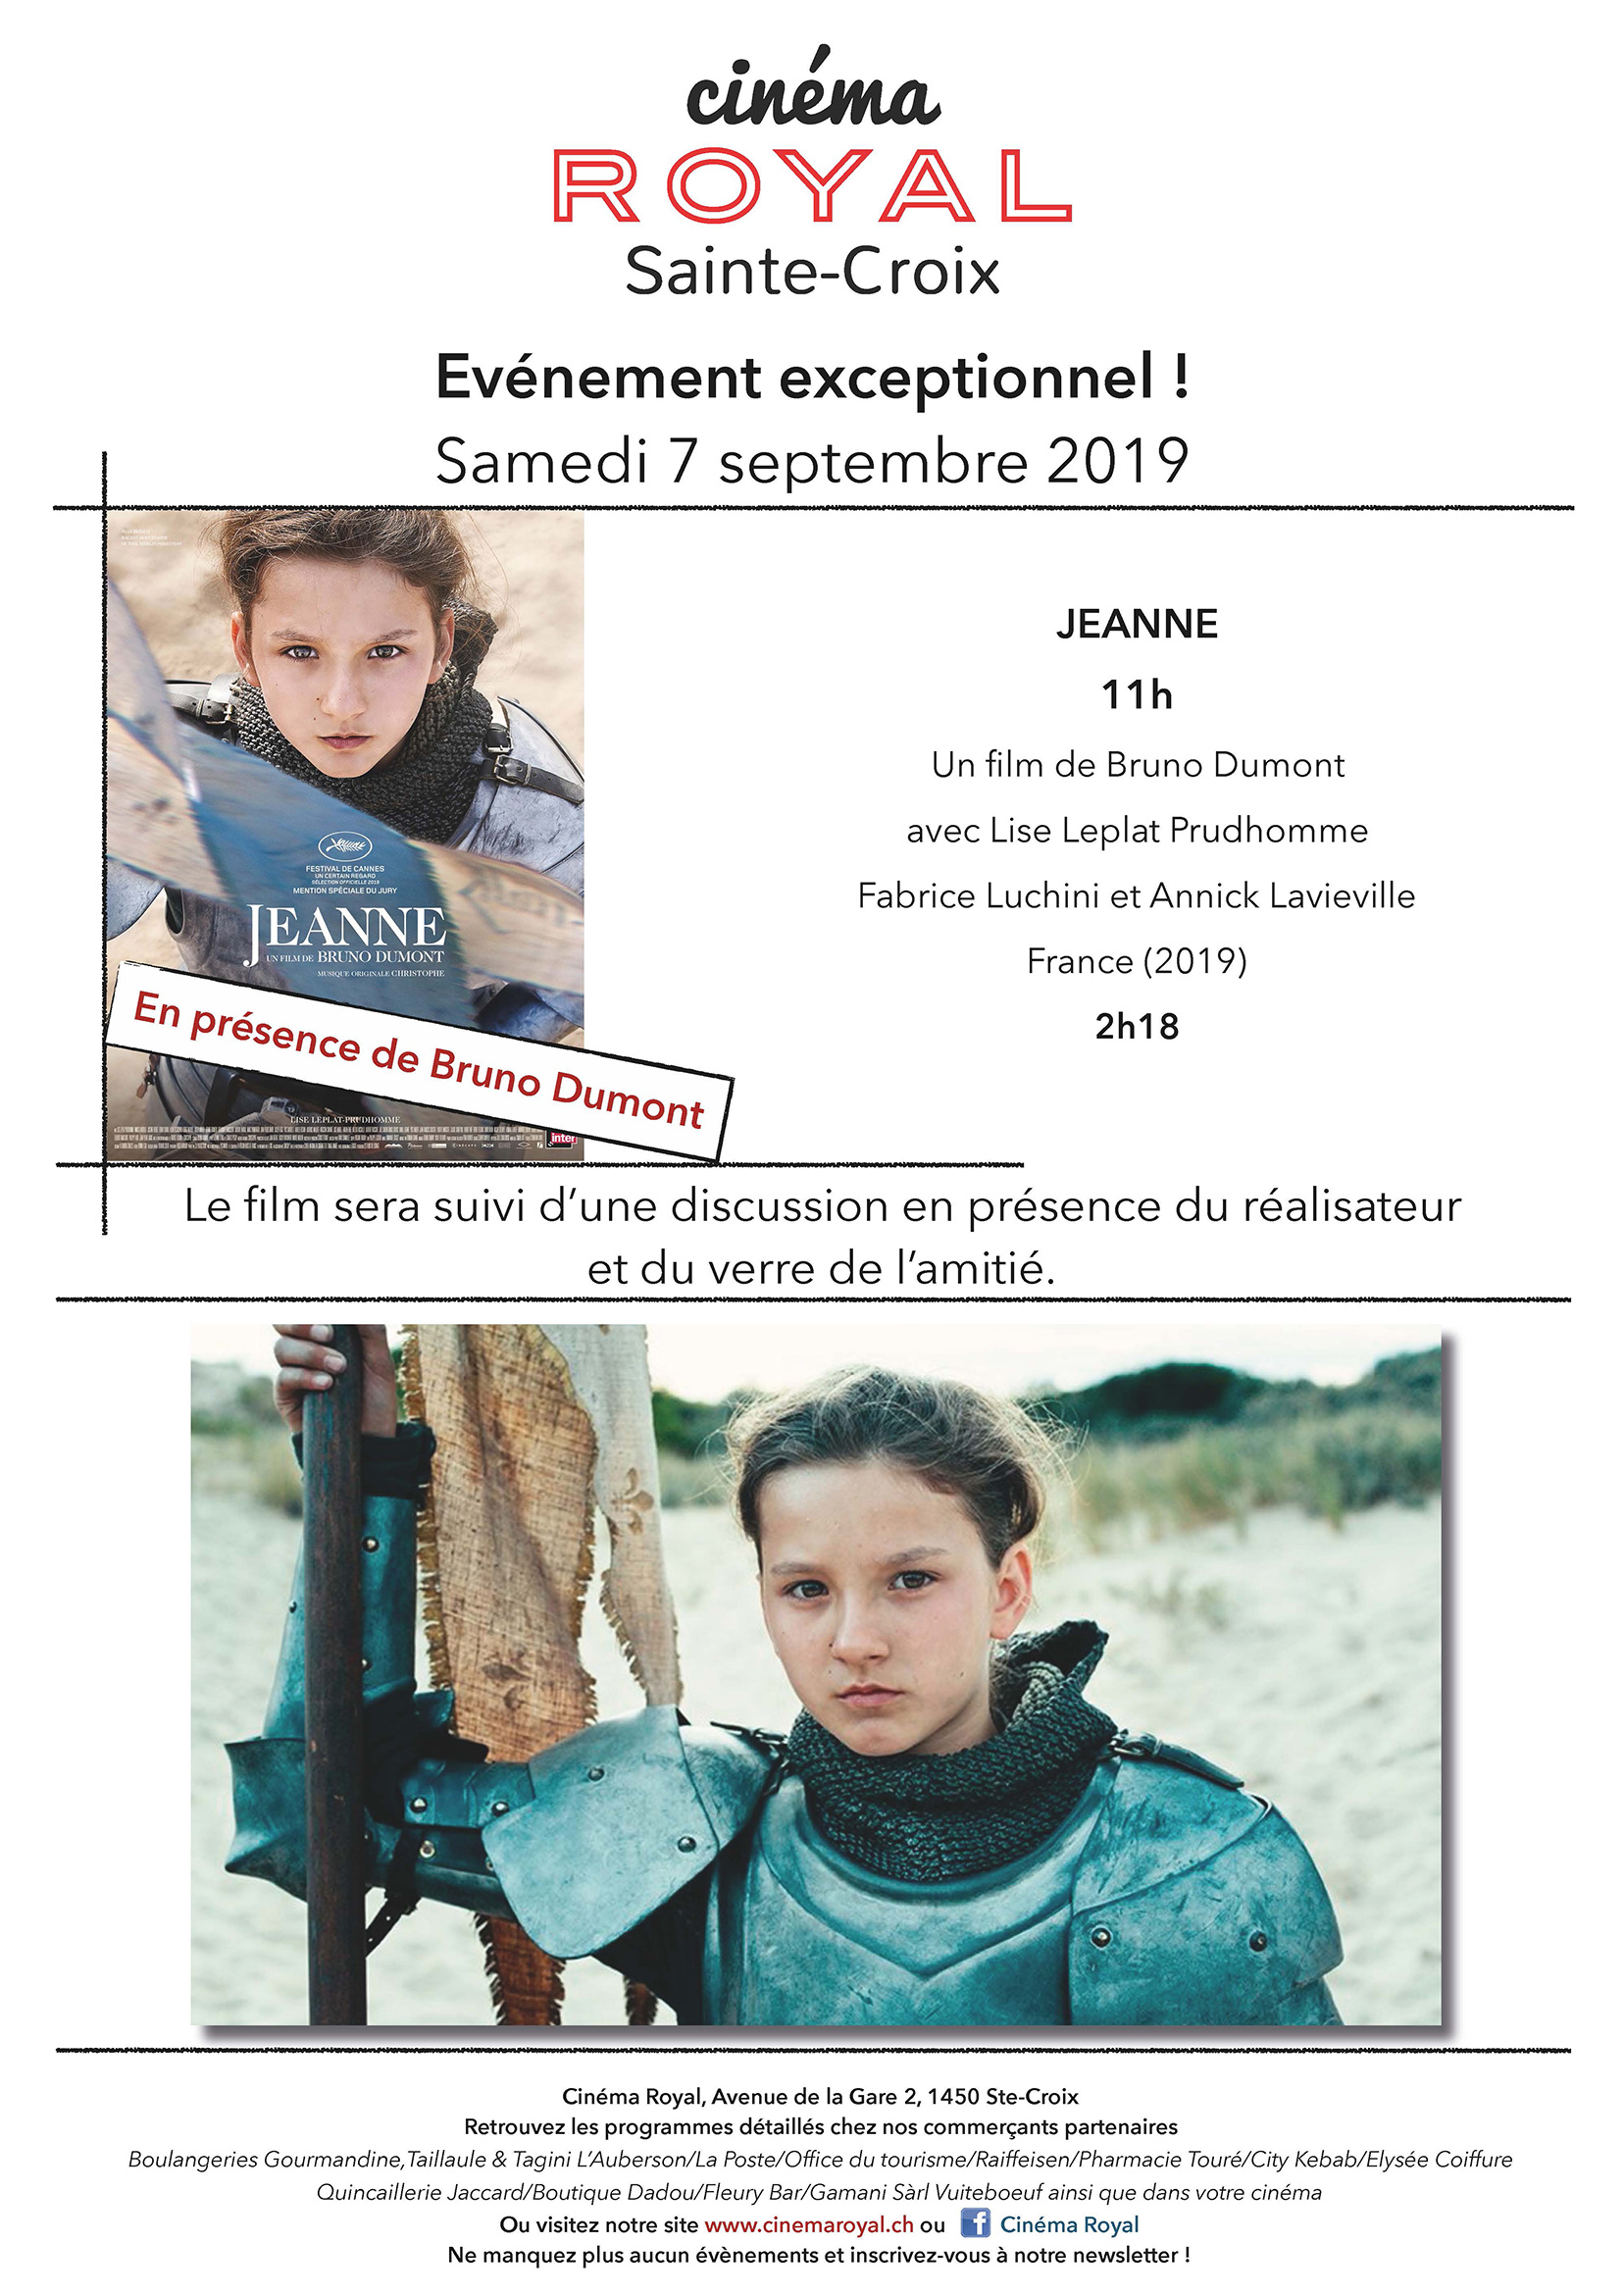 EventJeanne